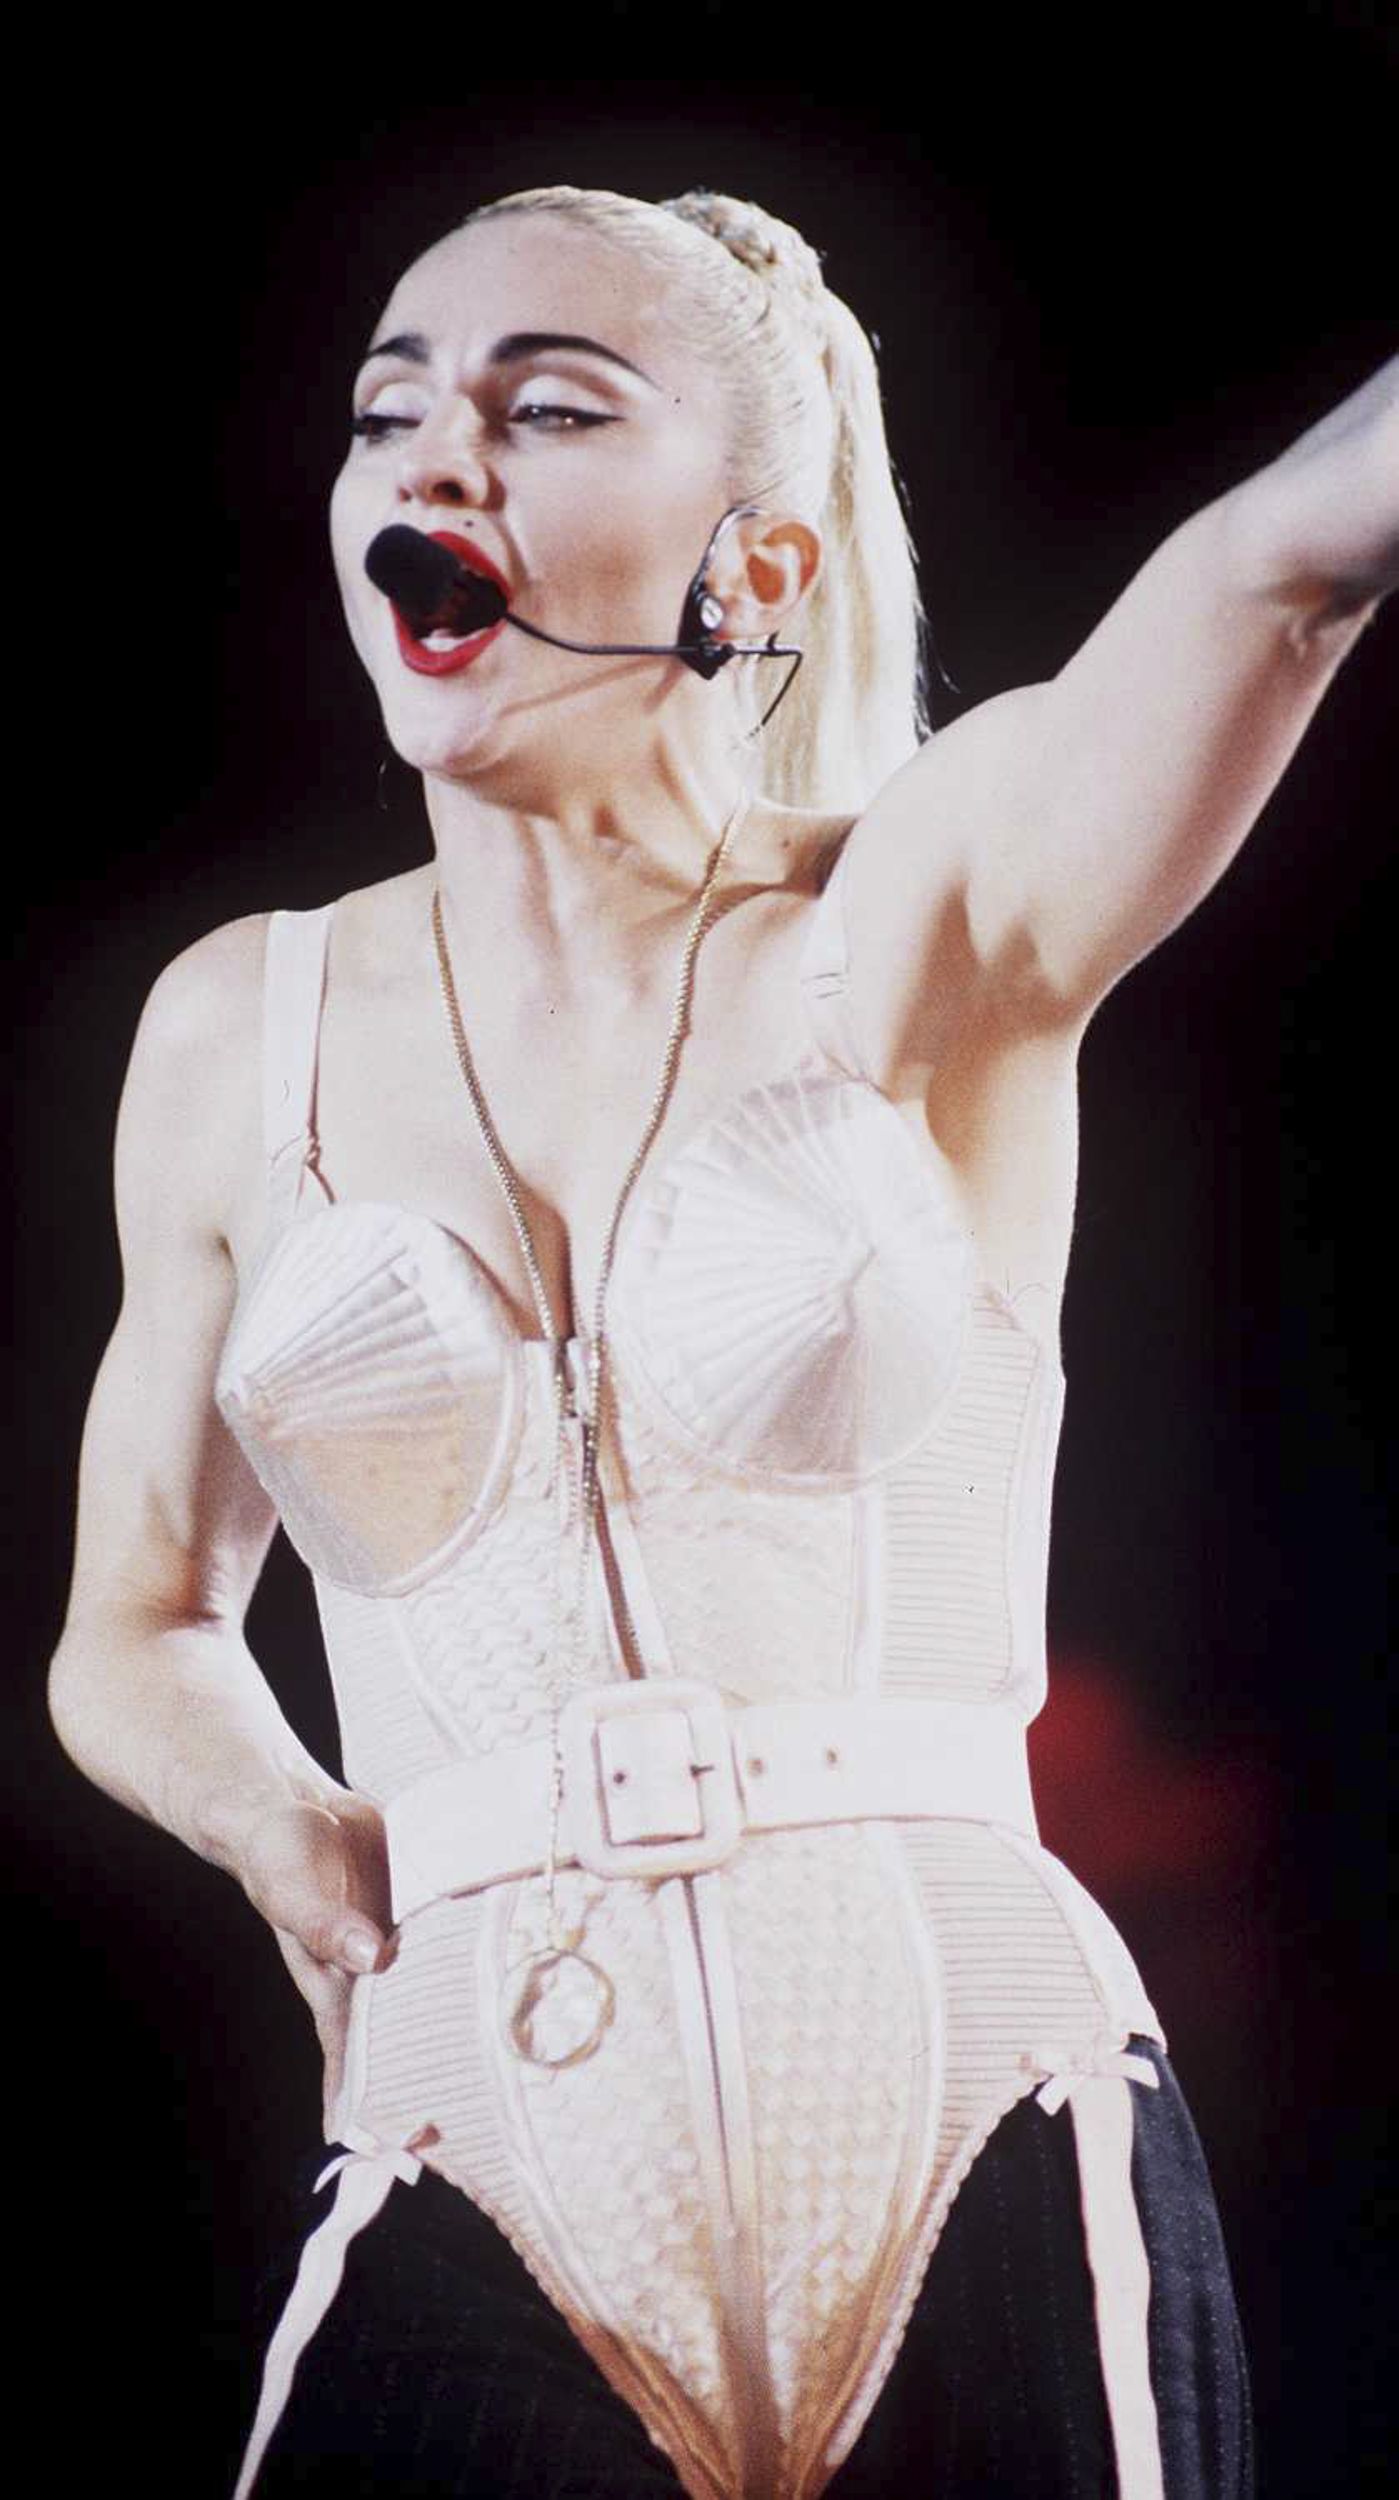 Katy Perry Channels Madonna's Iconic Cone Bra Costume in Pink